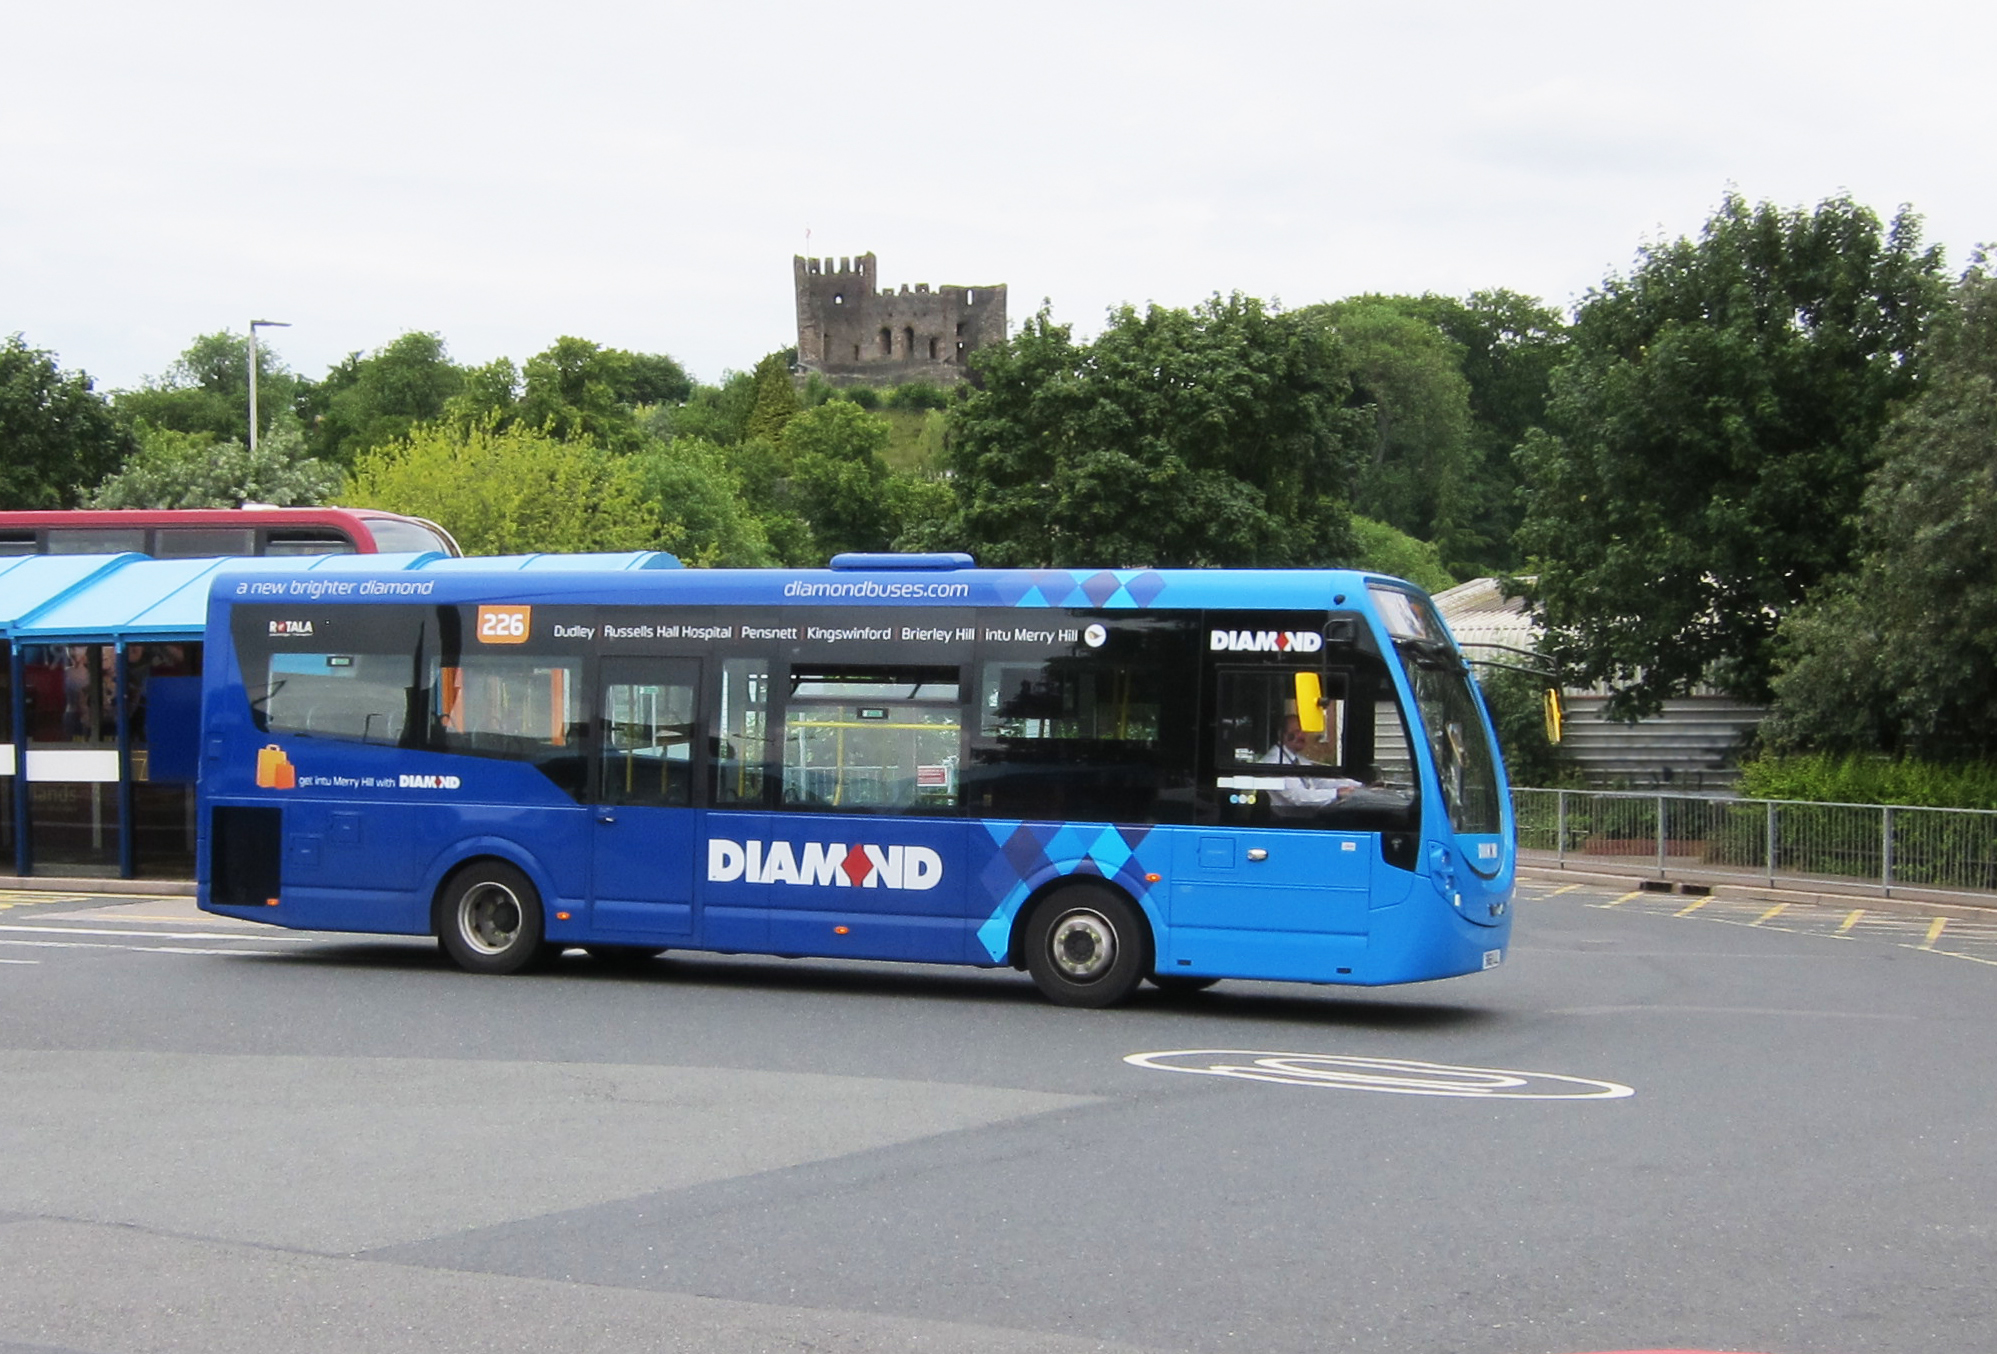 One of the new Diamond 'Streetlite' buses on the 226 route